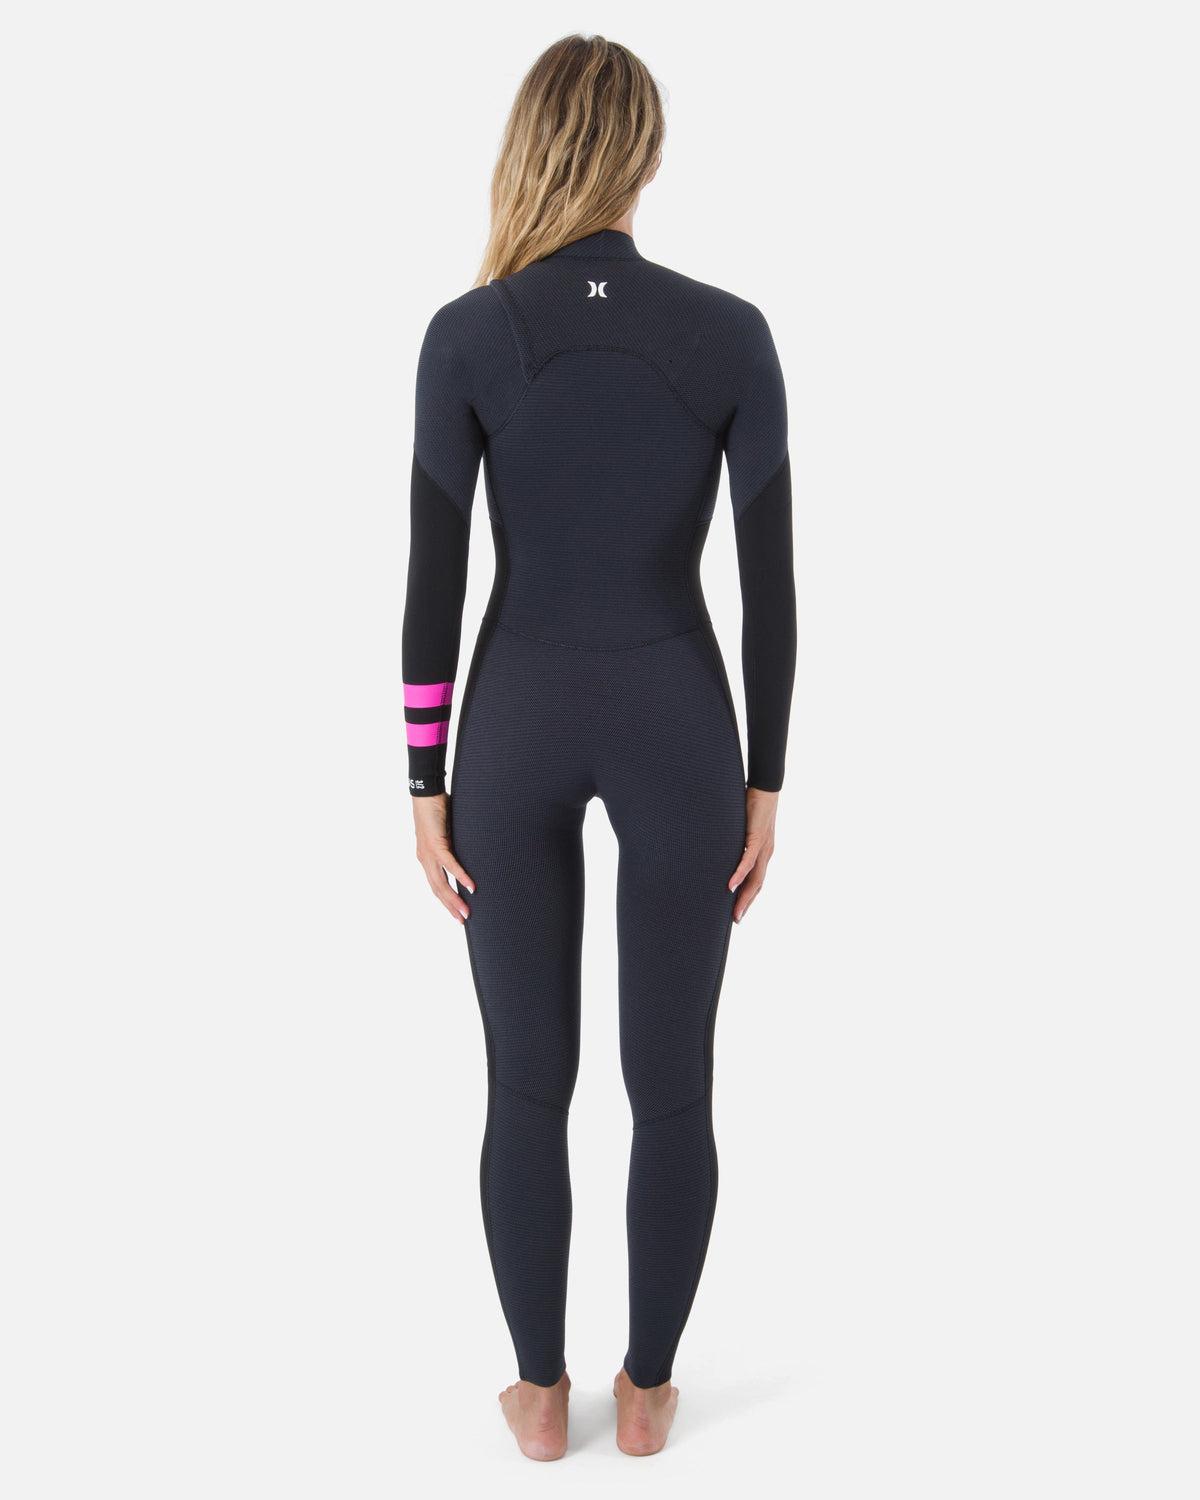 Women's Wetsuits, Surfing Swimsuits